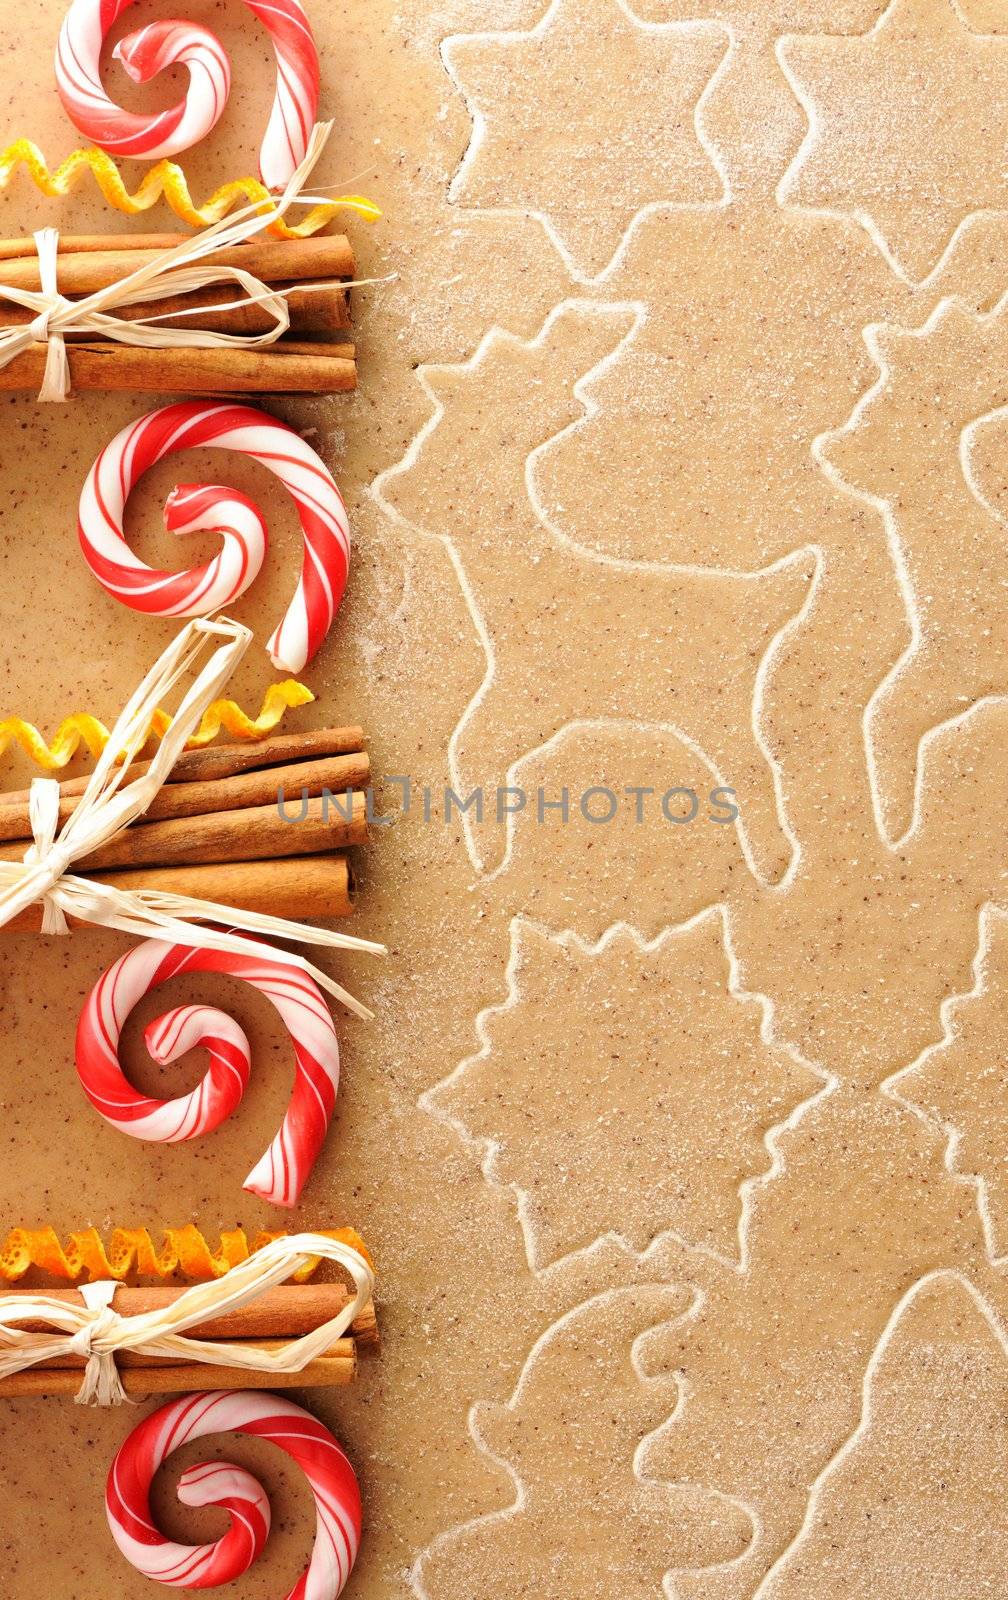 Christmas spices over gingerbread dough by haveseen